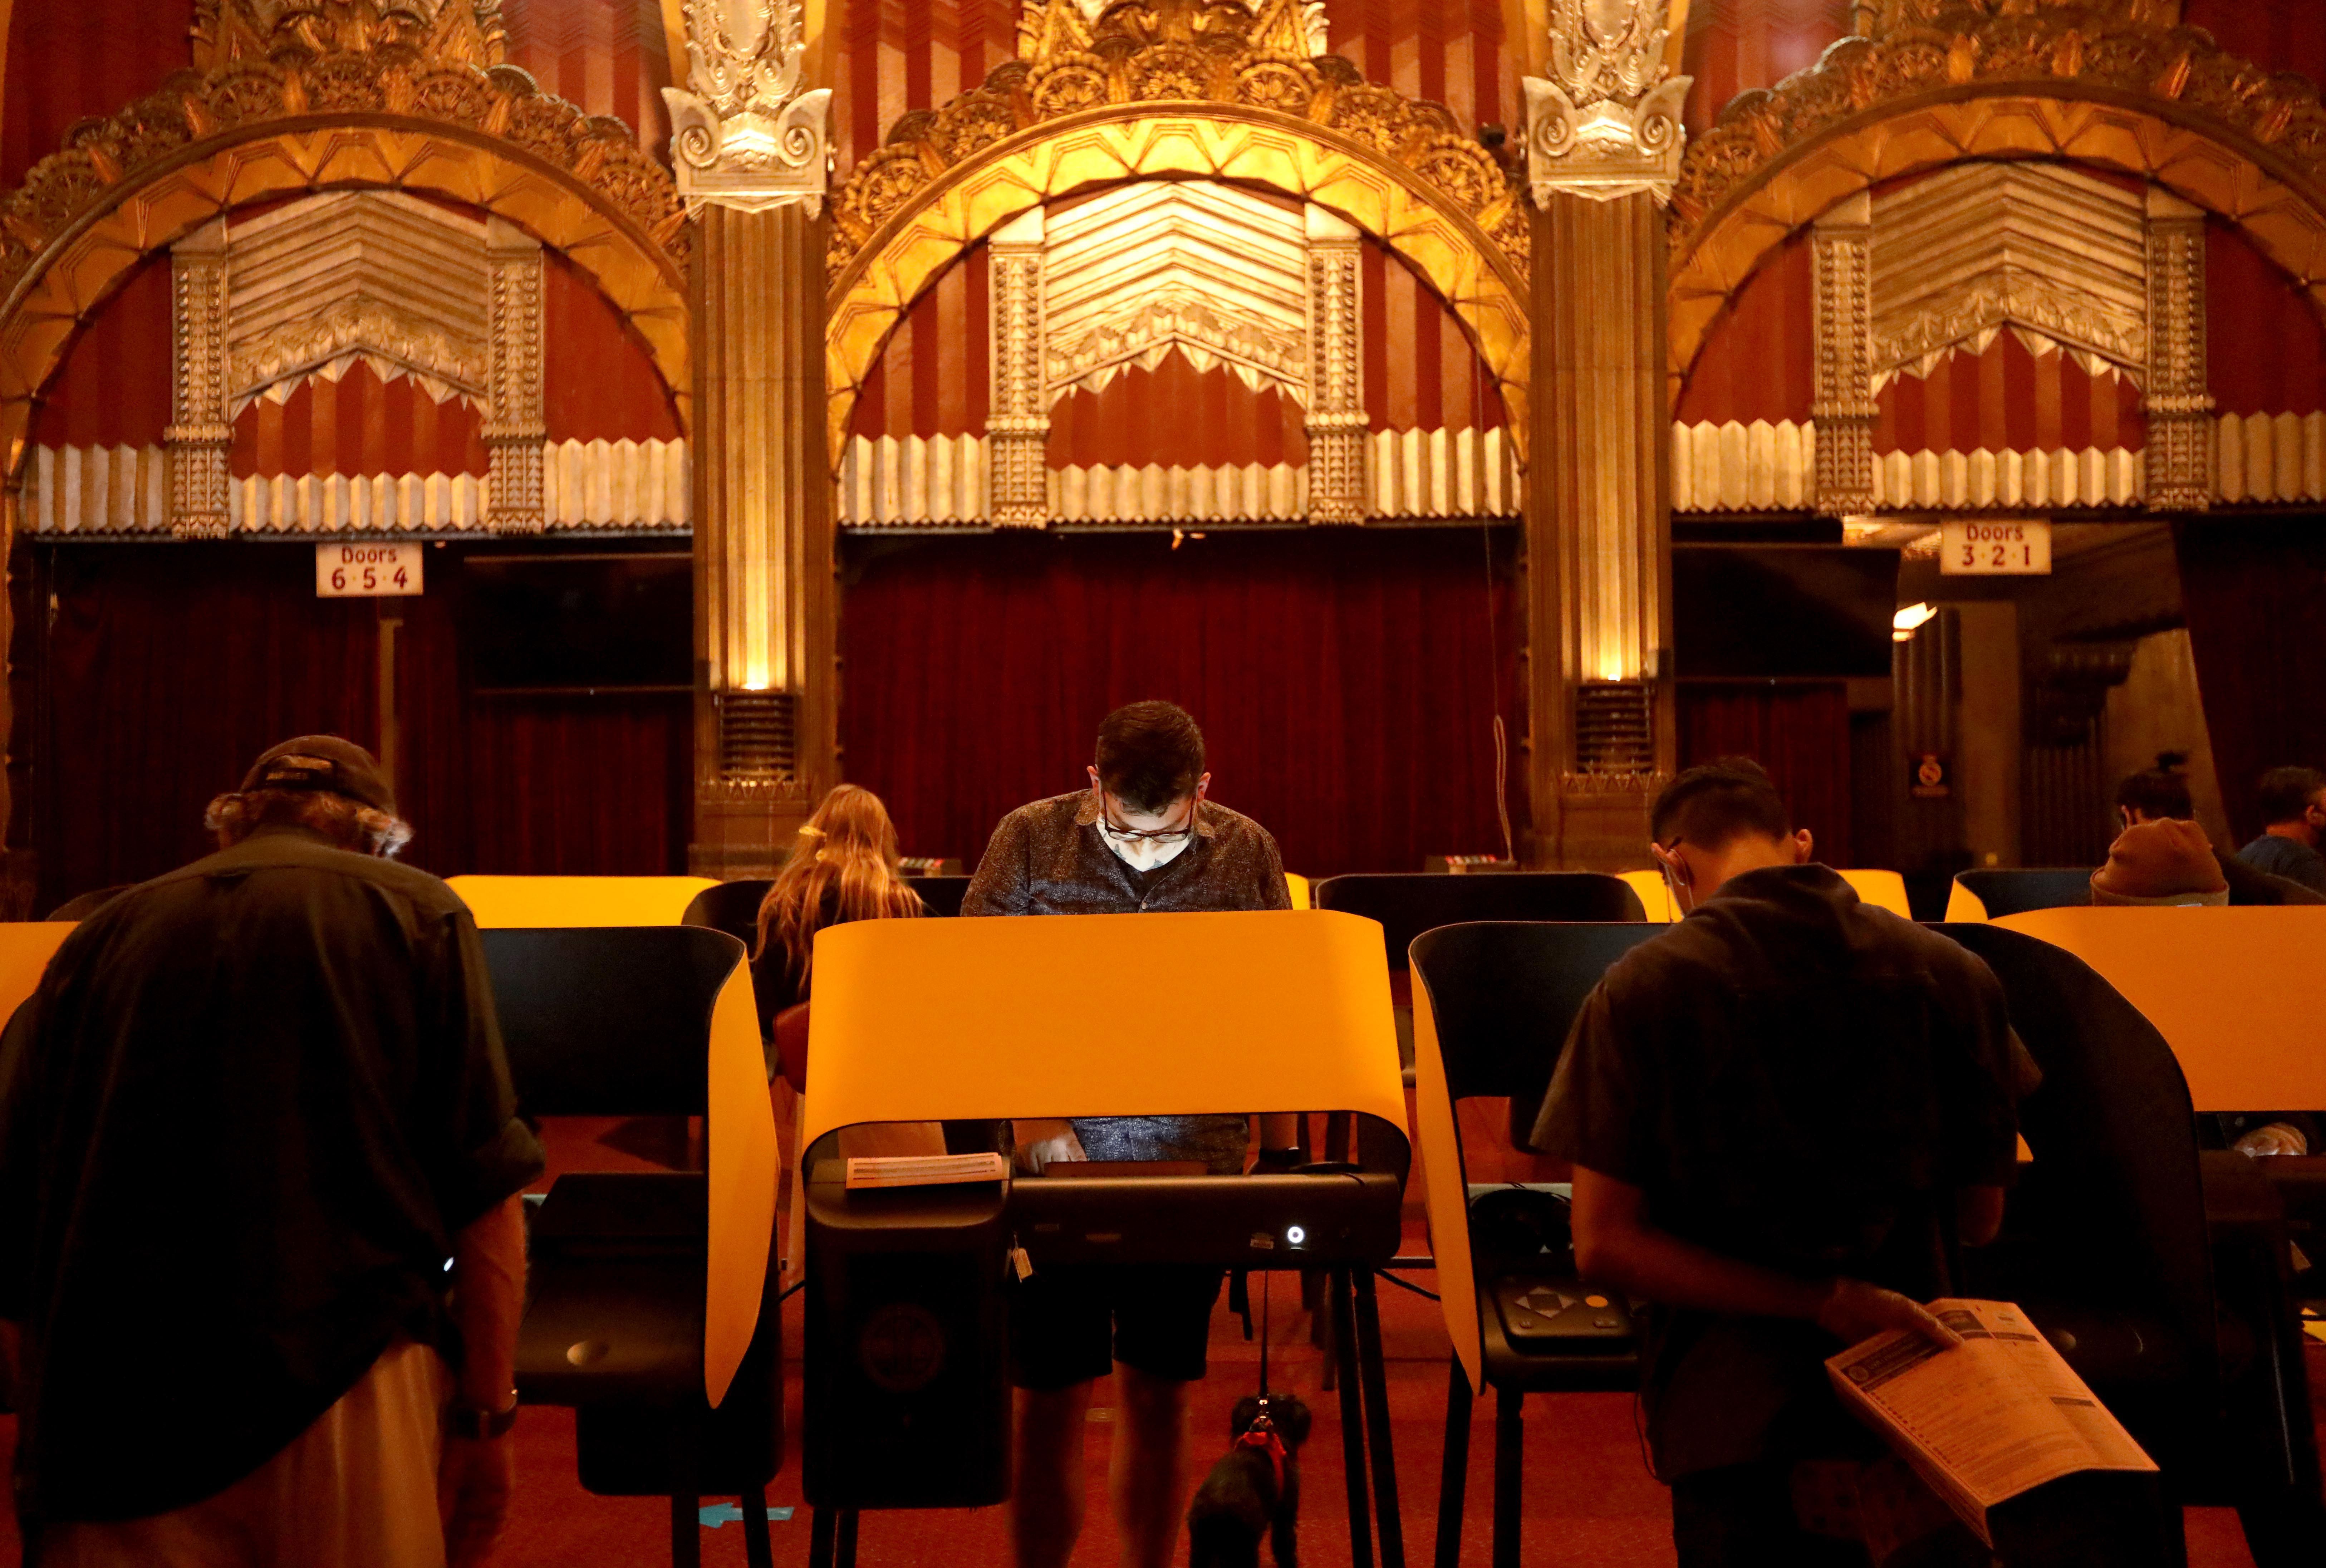  Voters cast their ballots on Election Day at the Pantages Theatre in Hollywood in Los Angeles on November 3